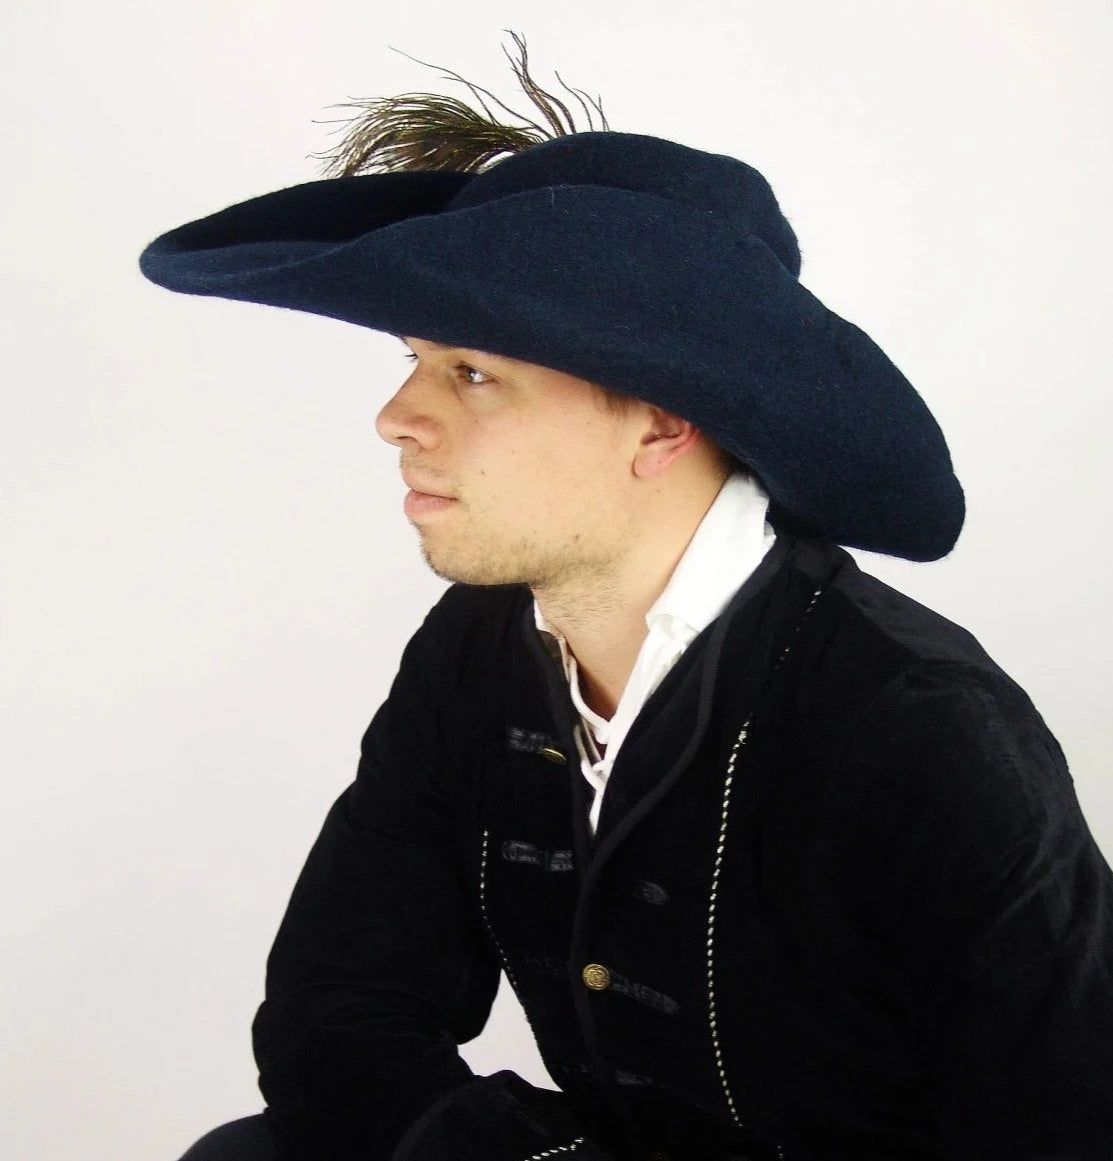 Cocked Pirate Hat in Black [RARE PIECE!]